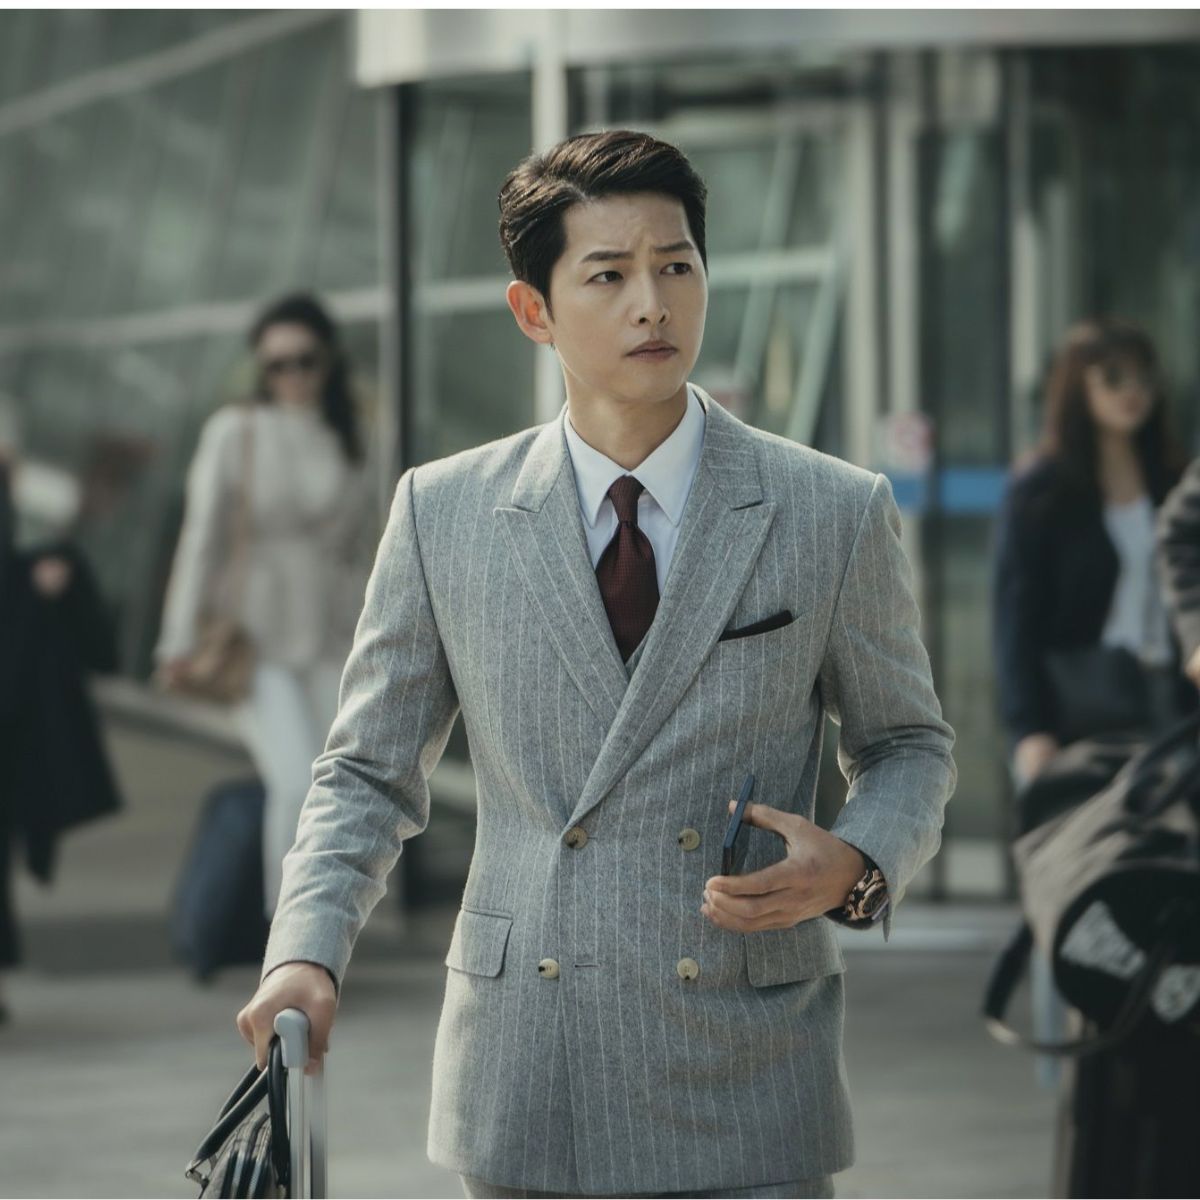 Take your wardrobe up a notch with these K-drama-inspired outfits for men